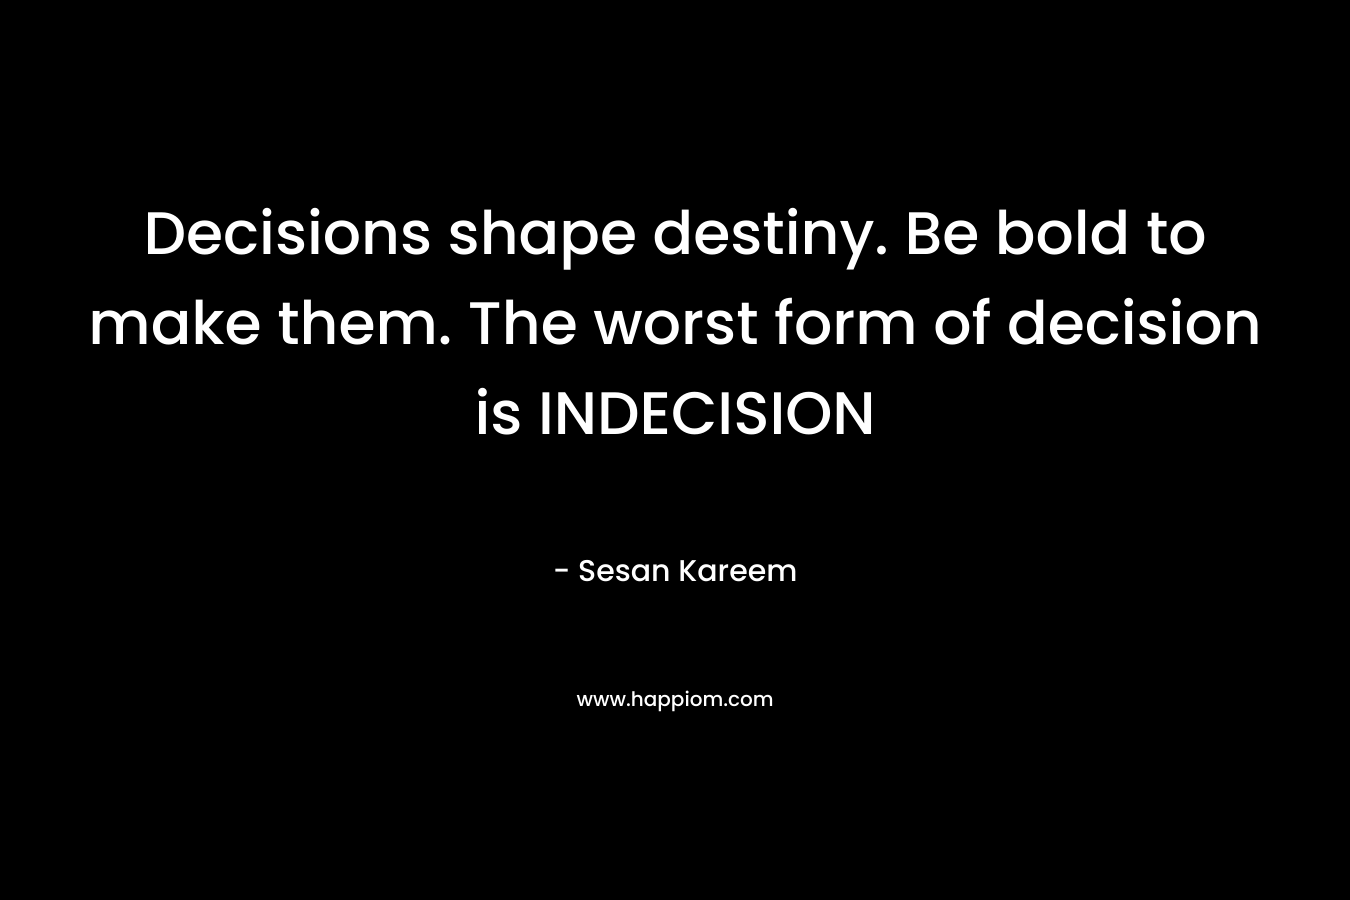 Decisions shape destiny. Be bold to make them. The worst form of decision is INDECISION